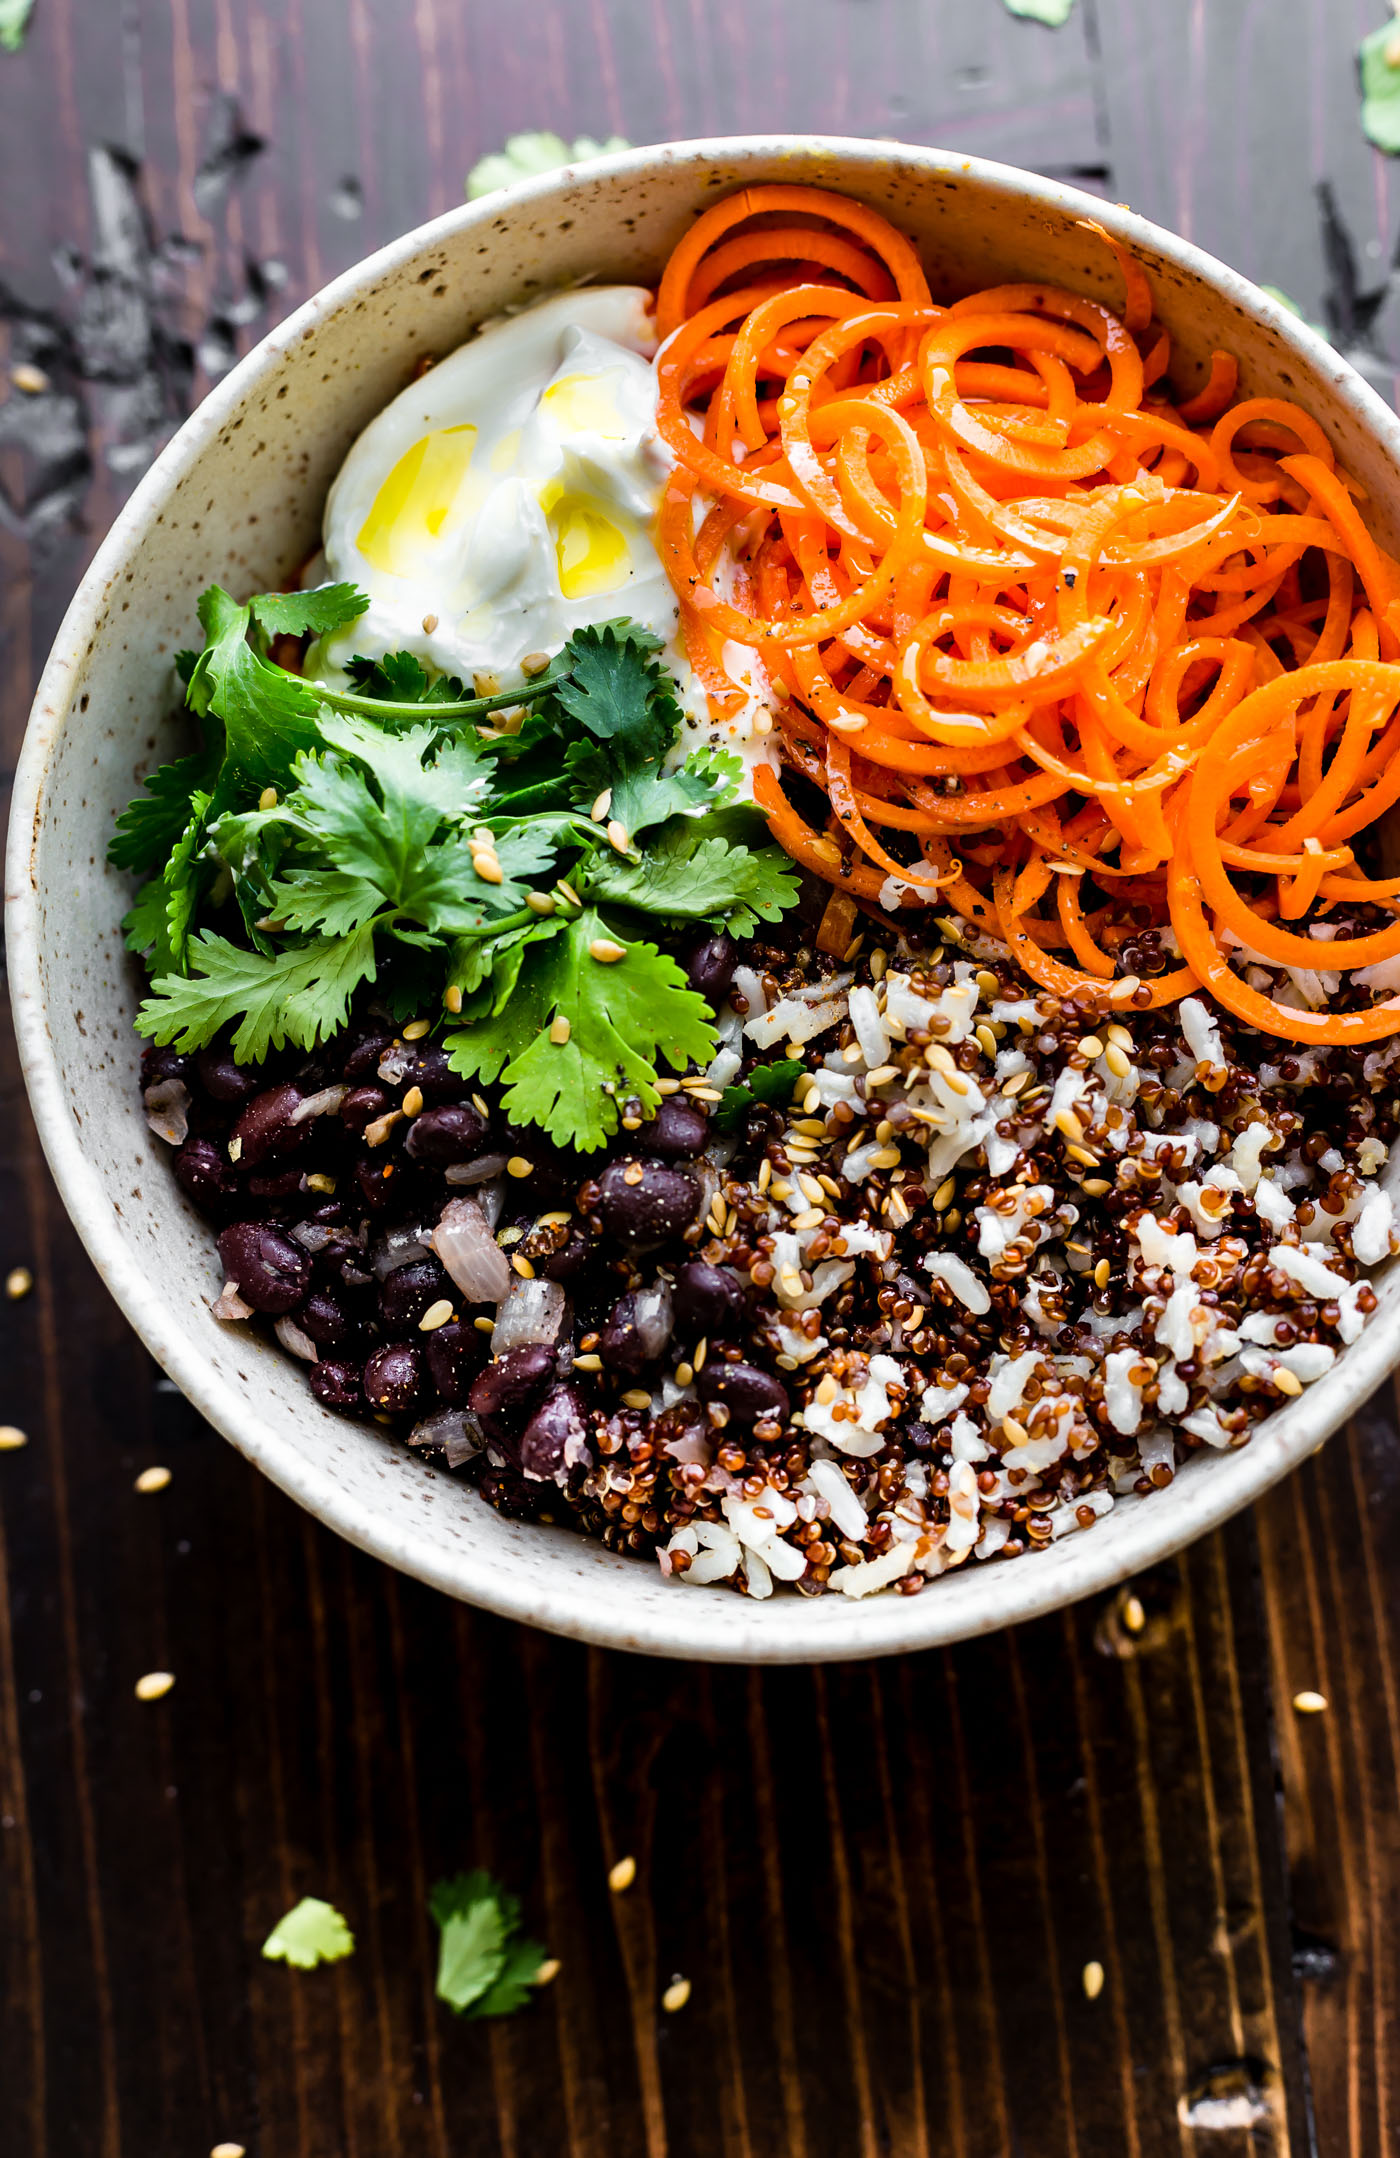 Gluten free Balance Bowls! No matter what you call these plant powered "balance bowls"— Power bowls, buddha bowls, Macro Bowls, Quinoa Bowls, etc. They truly are easy to make! A healthy meal prep bowl packed full of balanced macronutrients, vitamins, minerals, and more!